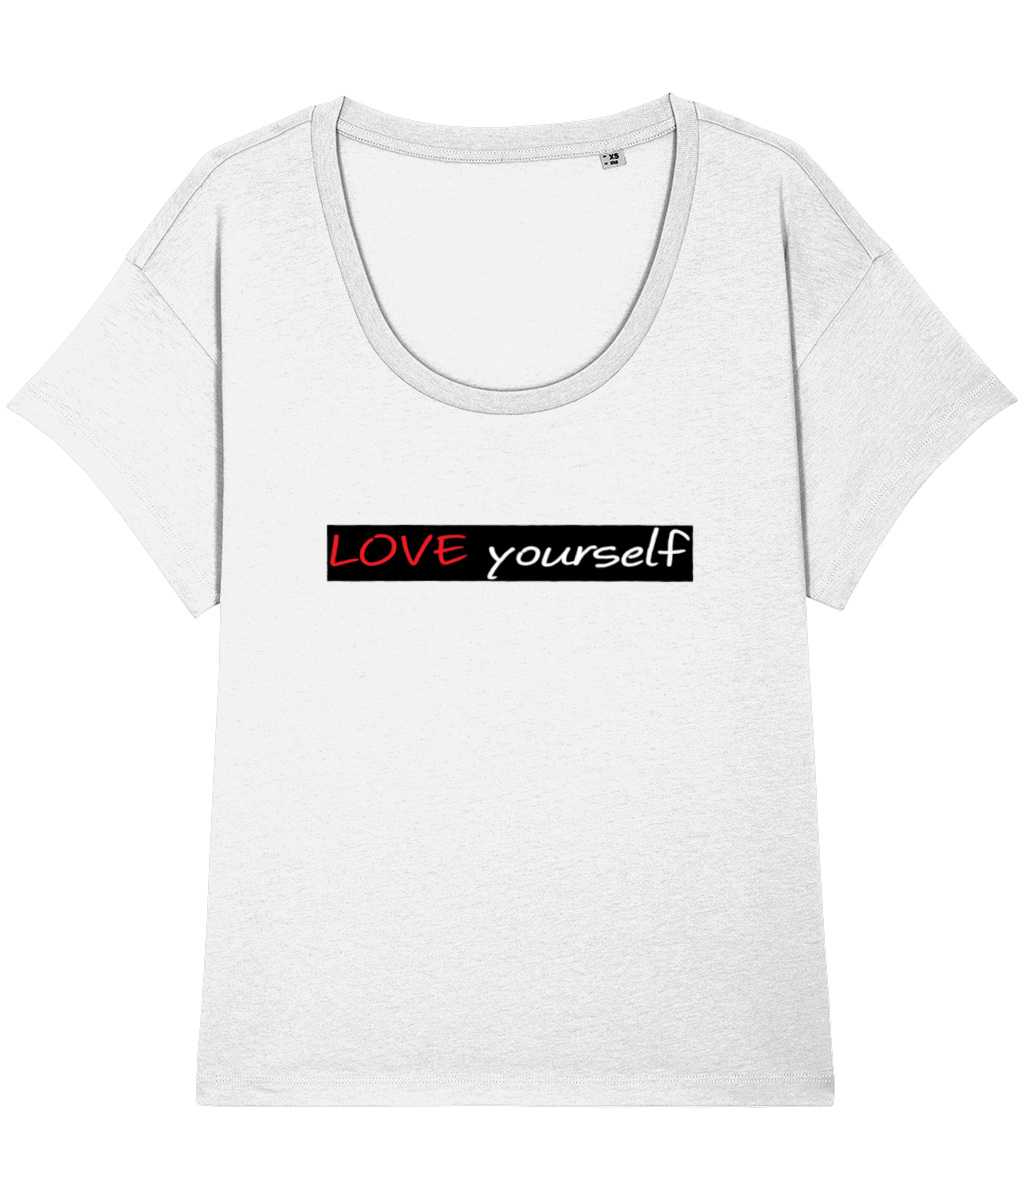 ‘LOVE yourself’, Organic Women's T-shirt (Neck relaxed fit)